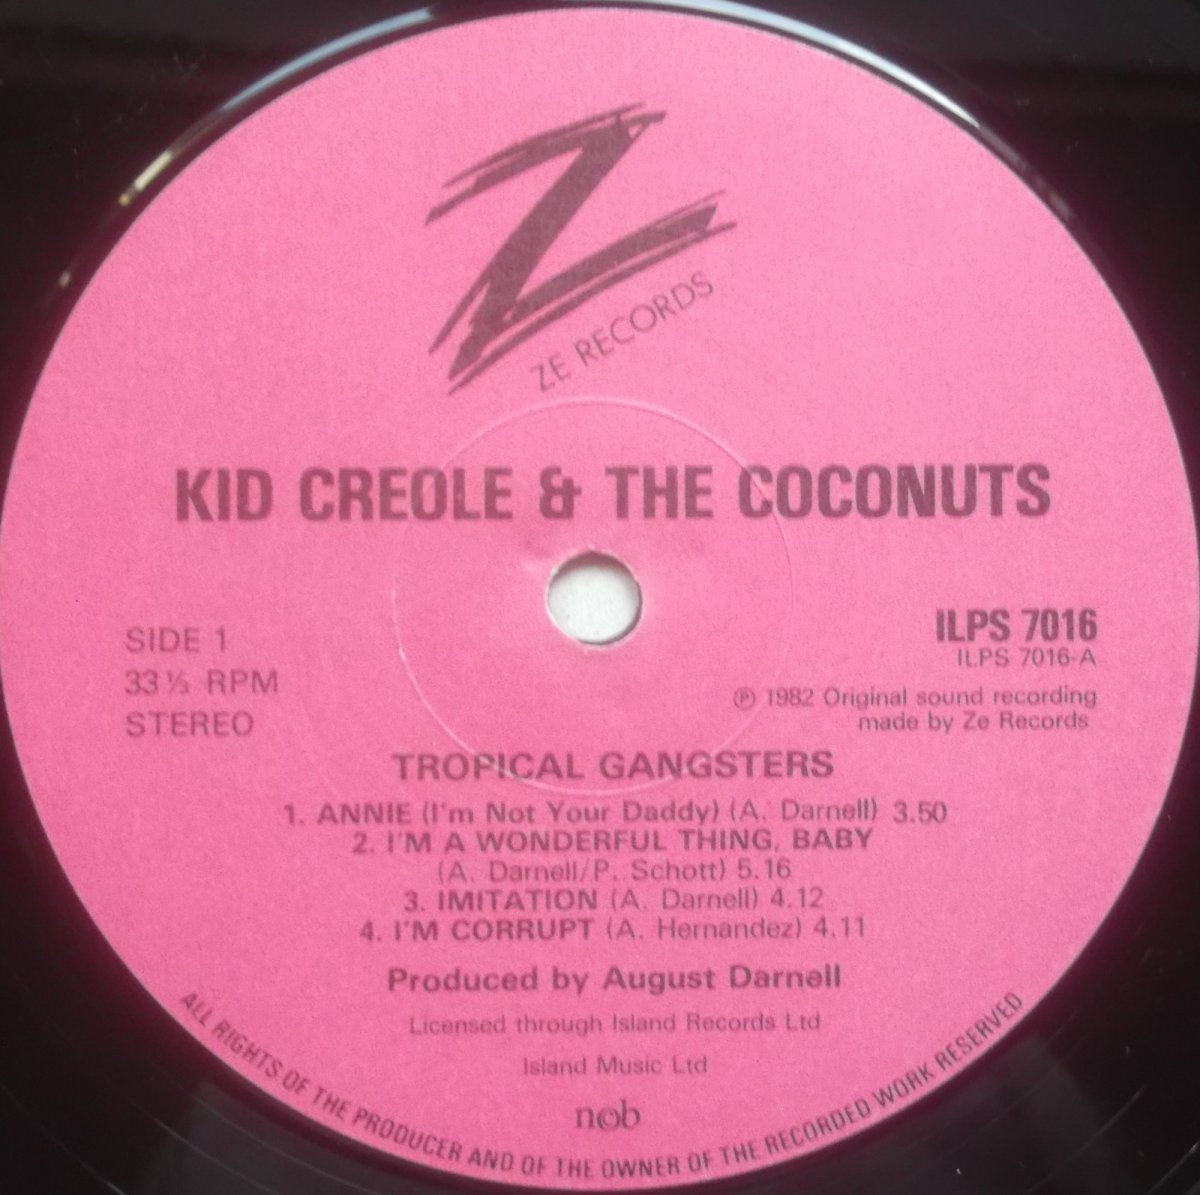 Kid Creole & The Coconuts – Tropical Gangsters